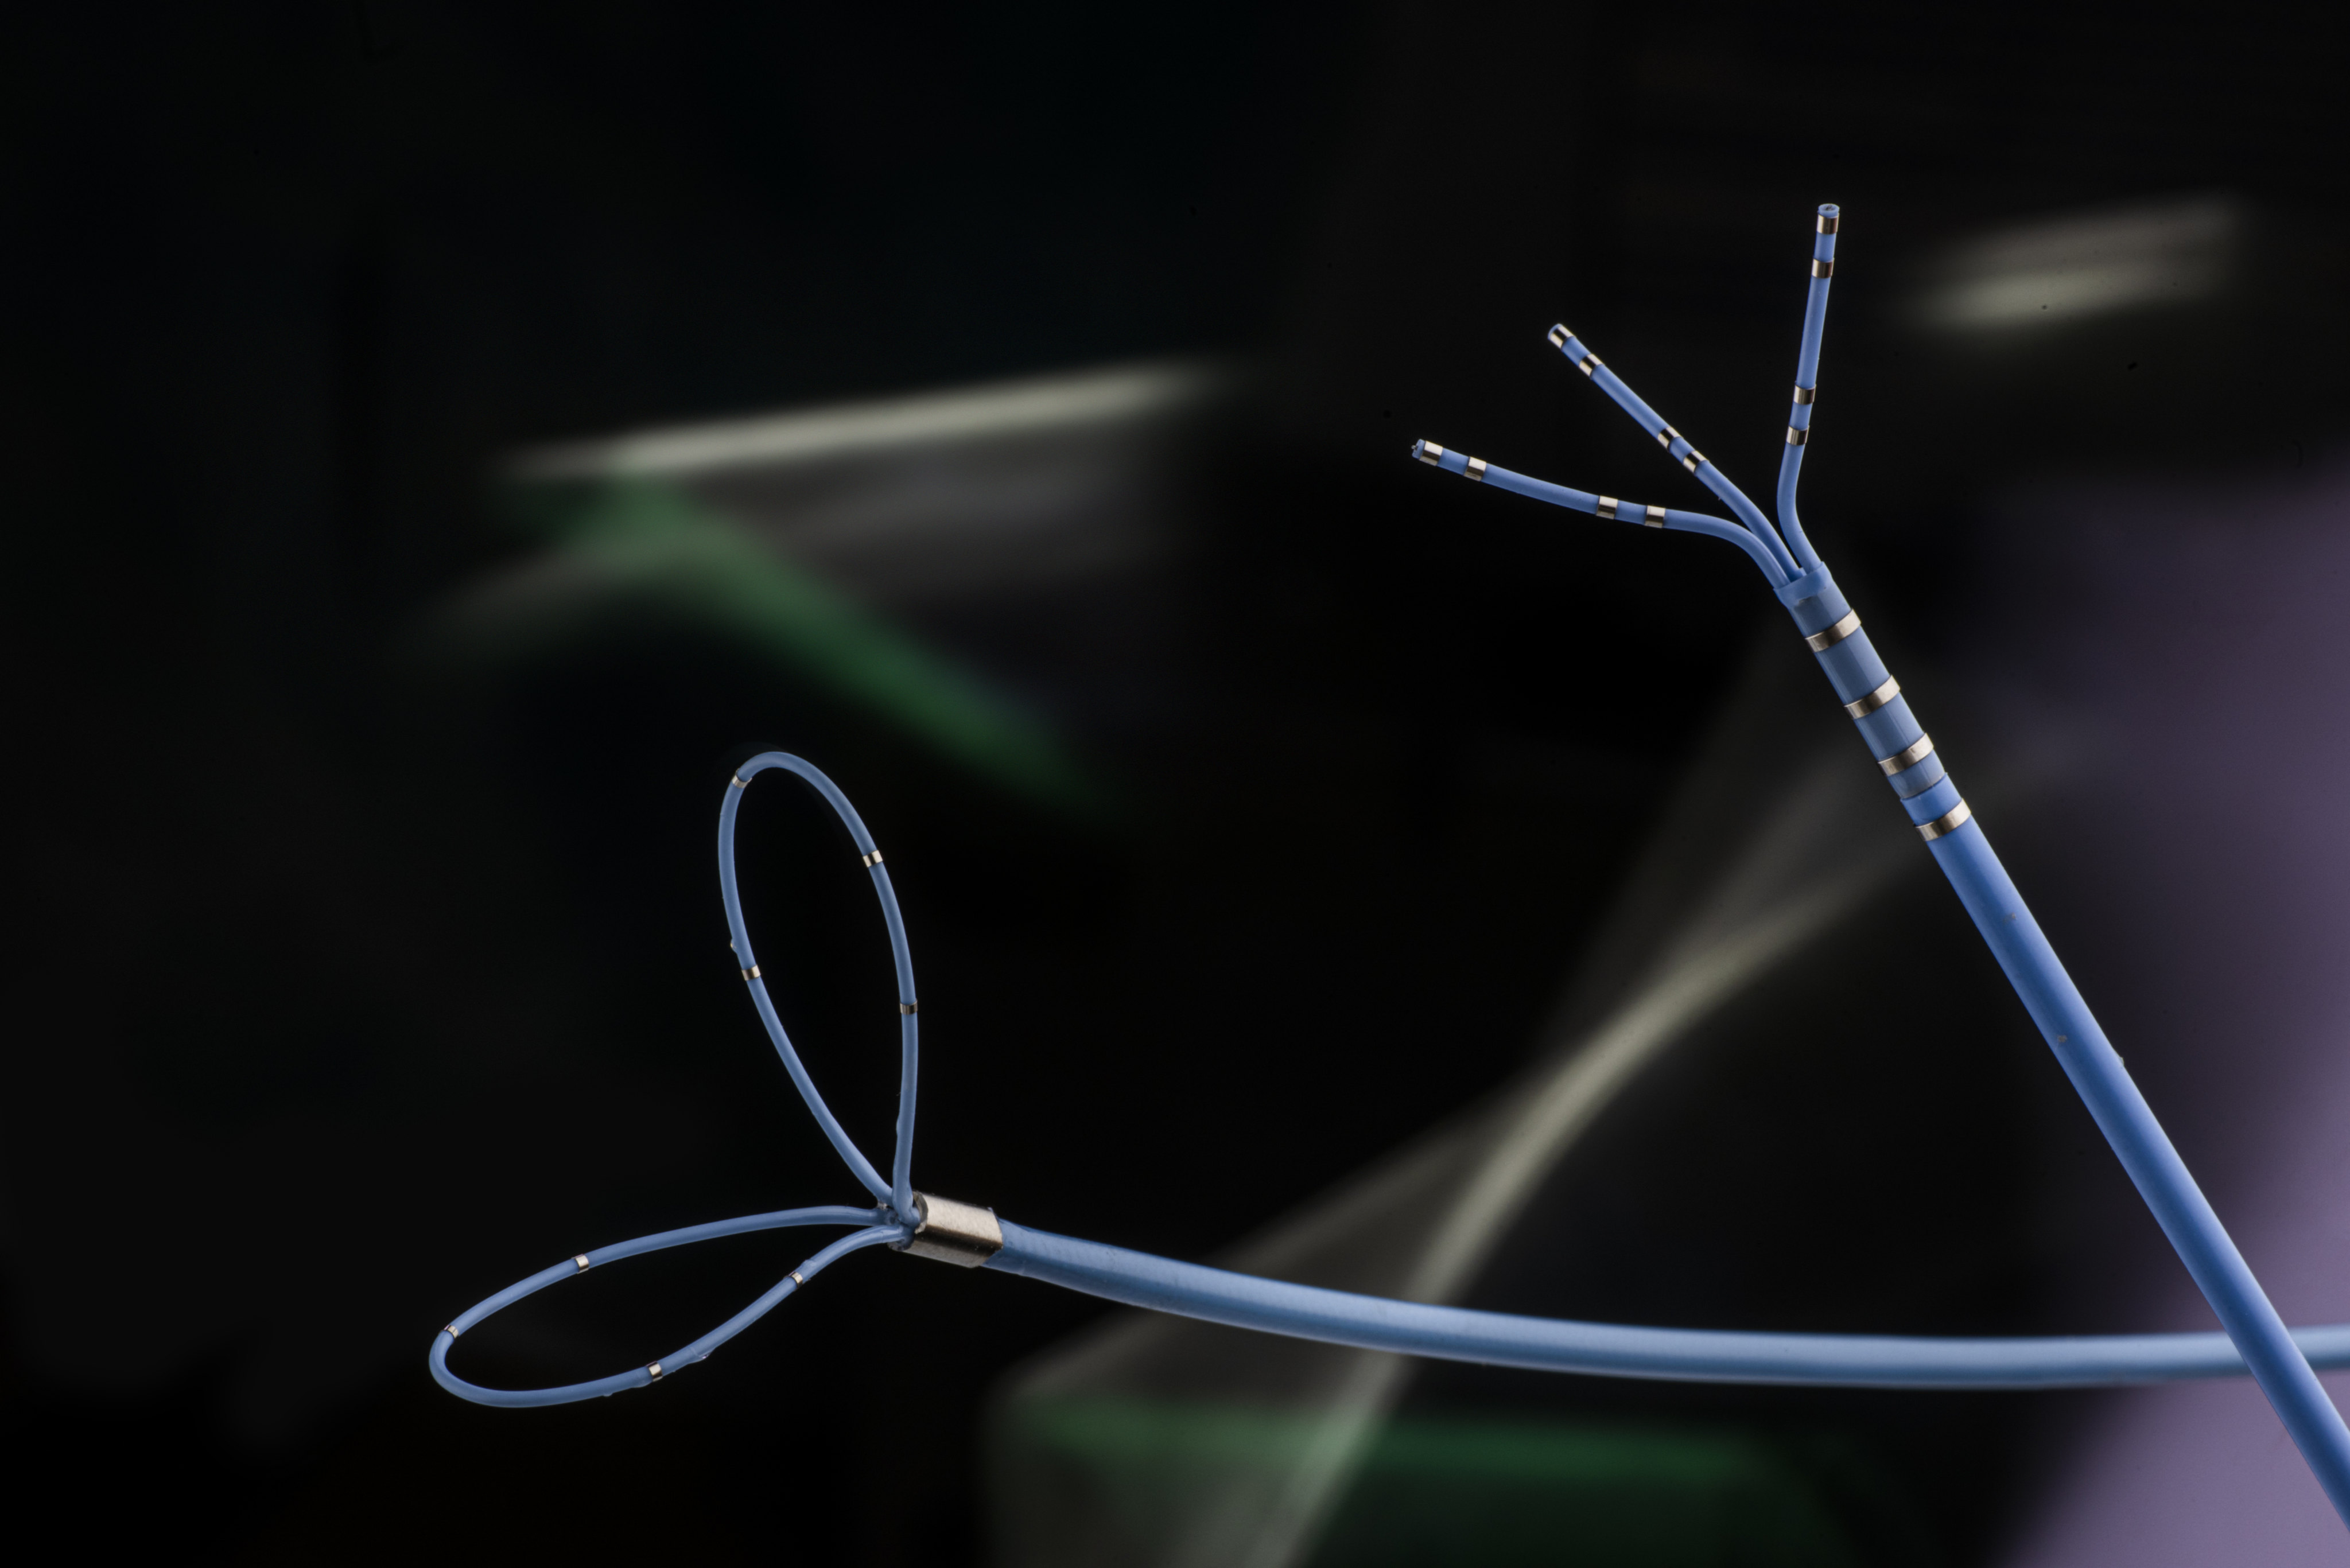 Medical device manufacturer Quasar develops steerable catheters, which are designed to reach specific areas that may be difficult to access with traditional medical instruments. Photo: Handout